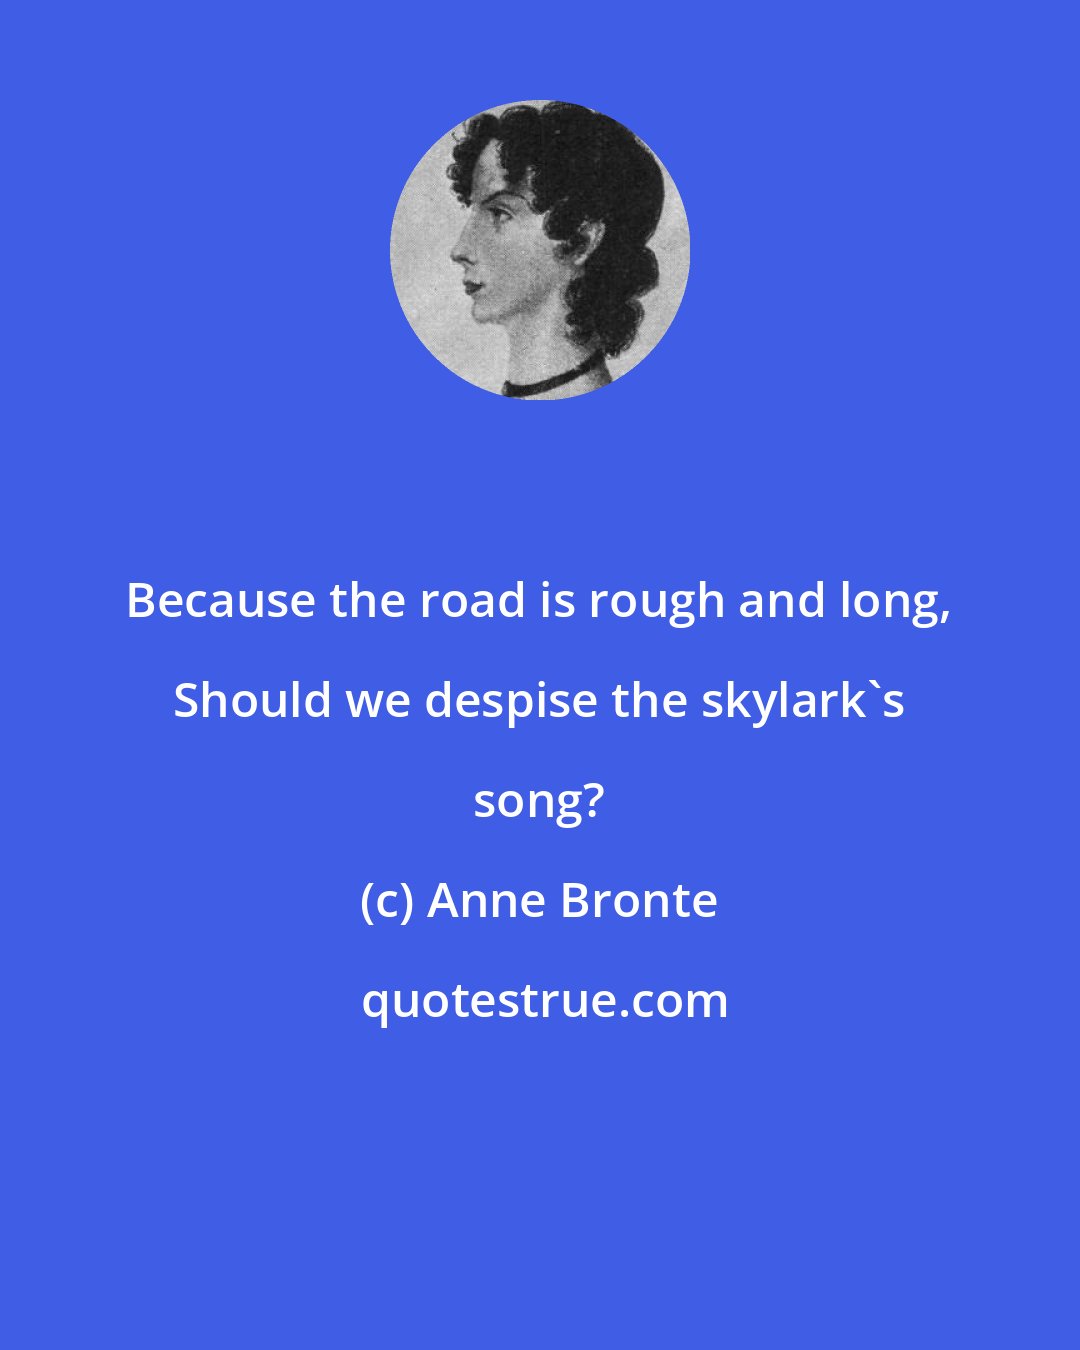 Anne Bronte: Because the road is rough and long, Should we despise the skylark's song?